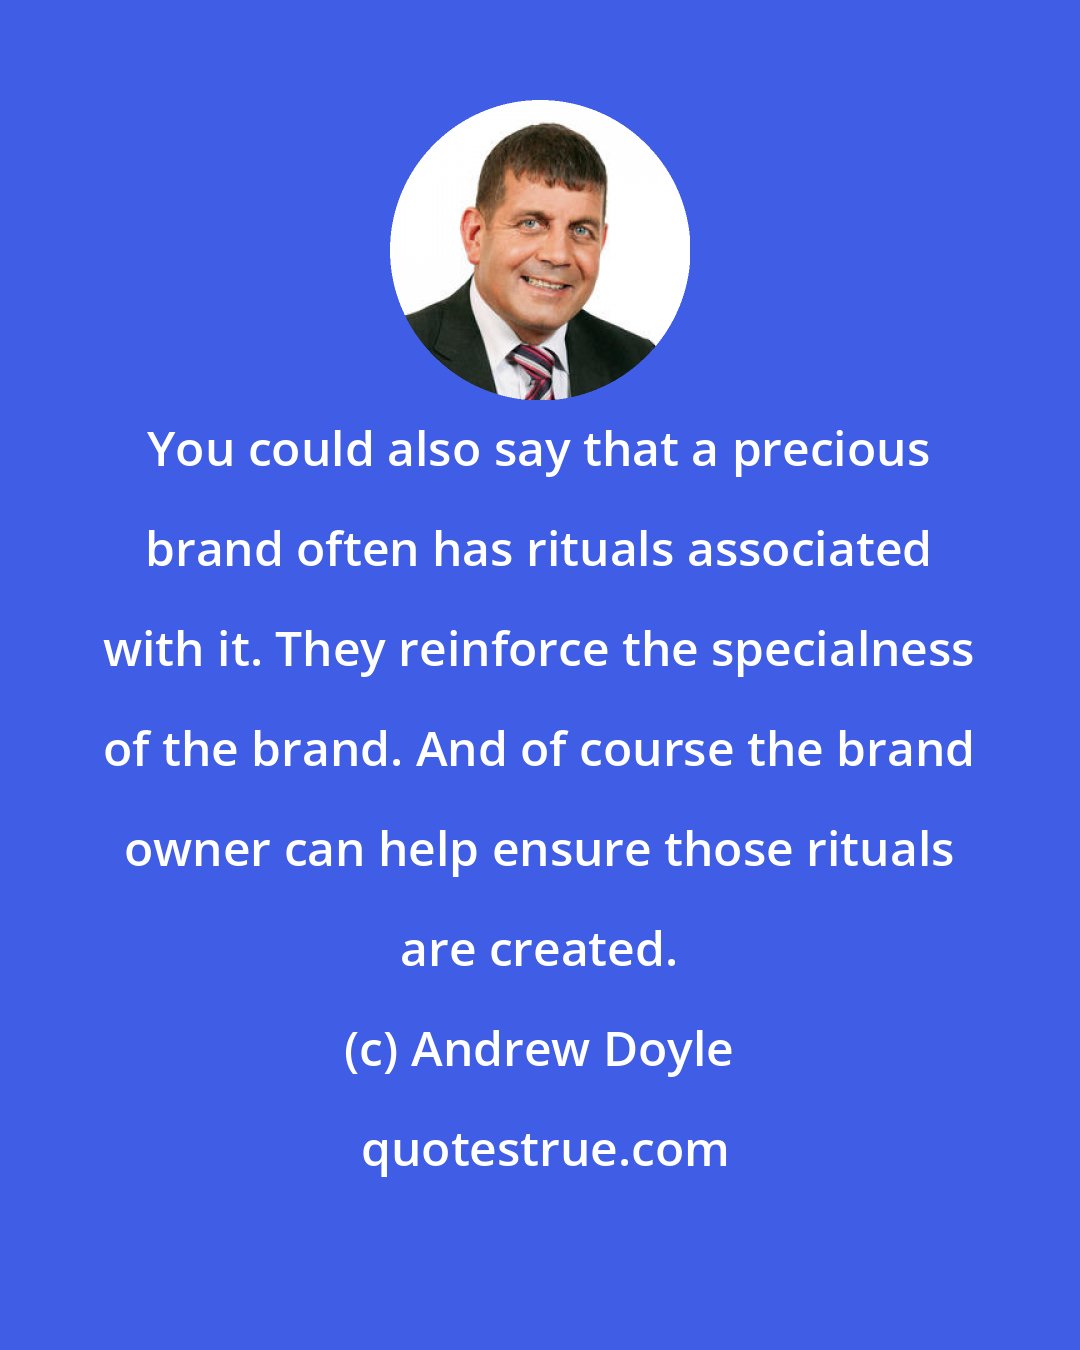 Andrew Doyle: You could also say that a precious brand often has rituals associated with it. They reinforce the specialness of the brand. And of course the brand owner can help ensure those rituals are created.